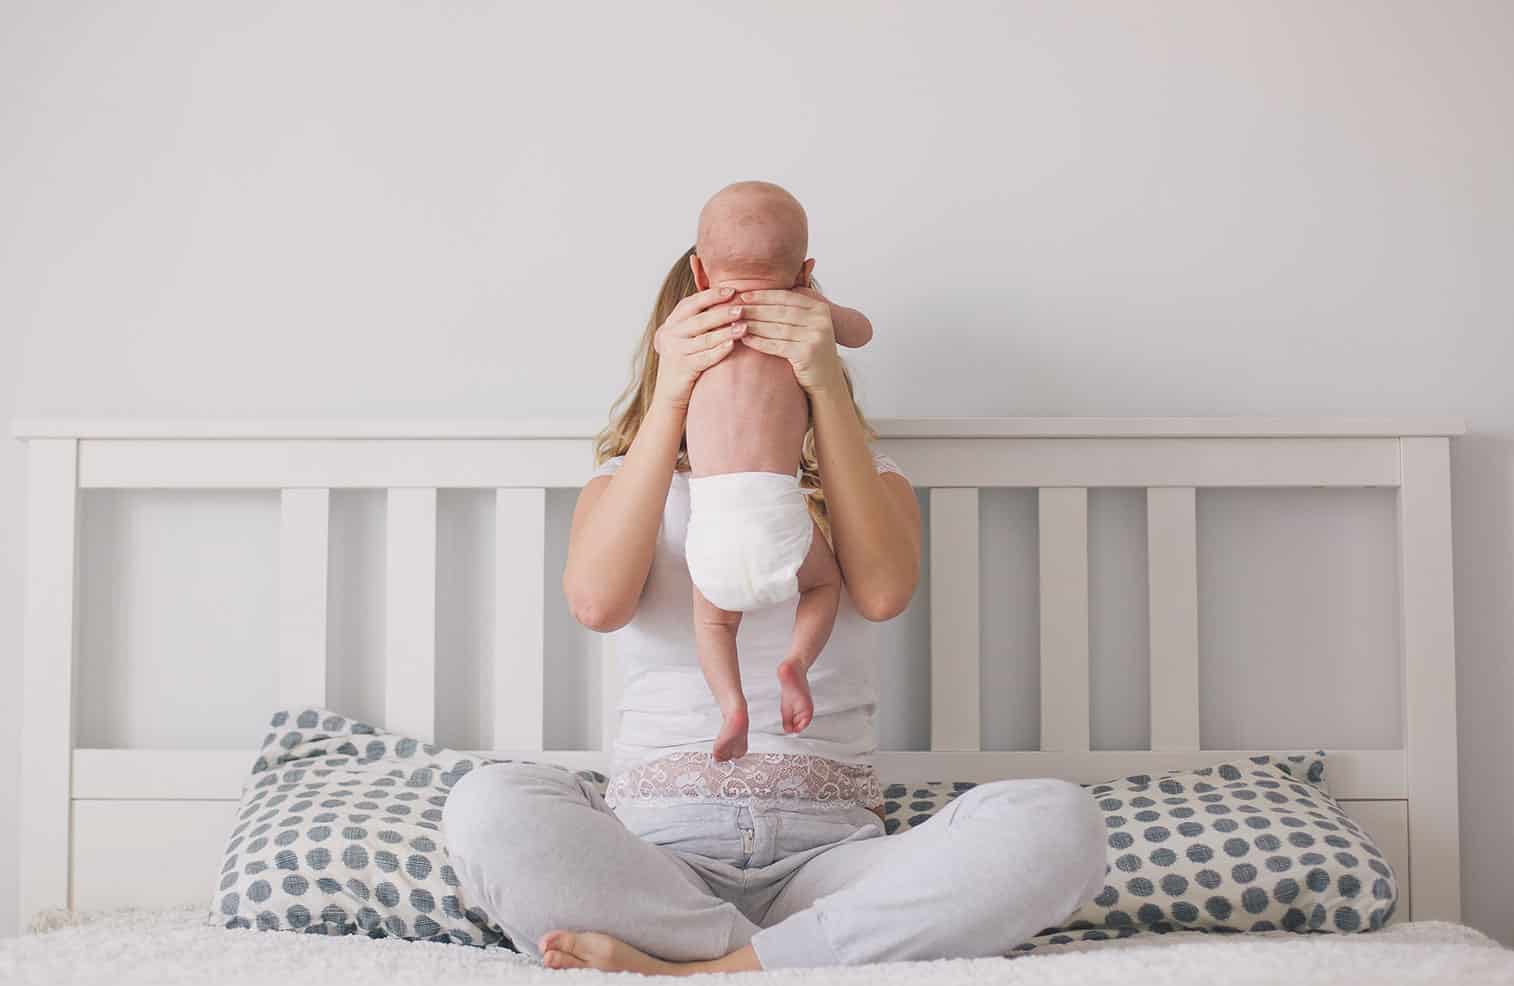 Here are some ways you can prepare for the fourth trimester while you're pregnant, so when your babe arrives you're in a great position to have a positive and enjoyable time with as little stress and overwhelm as possible.